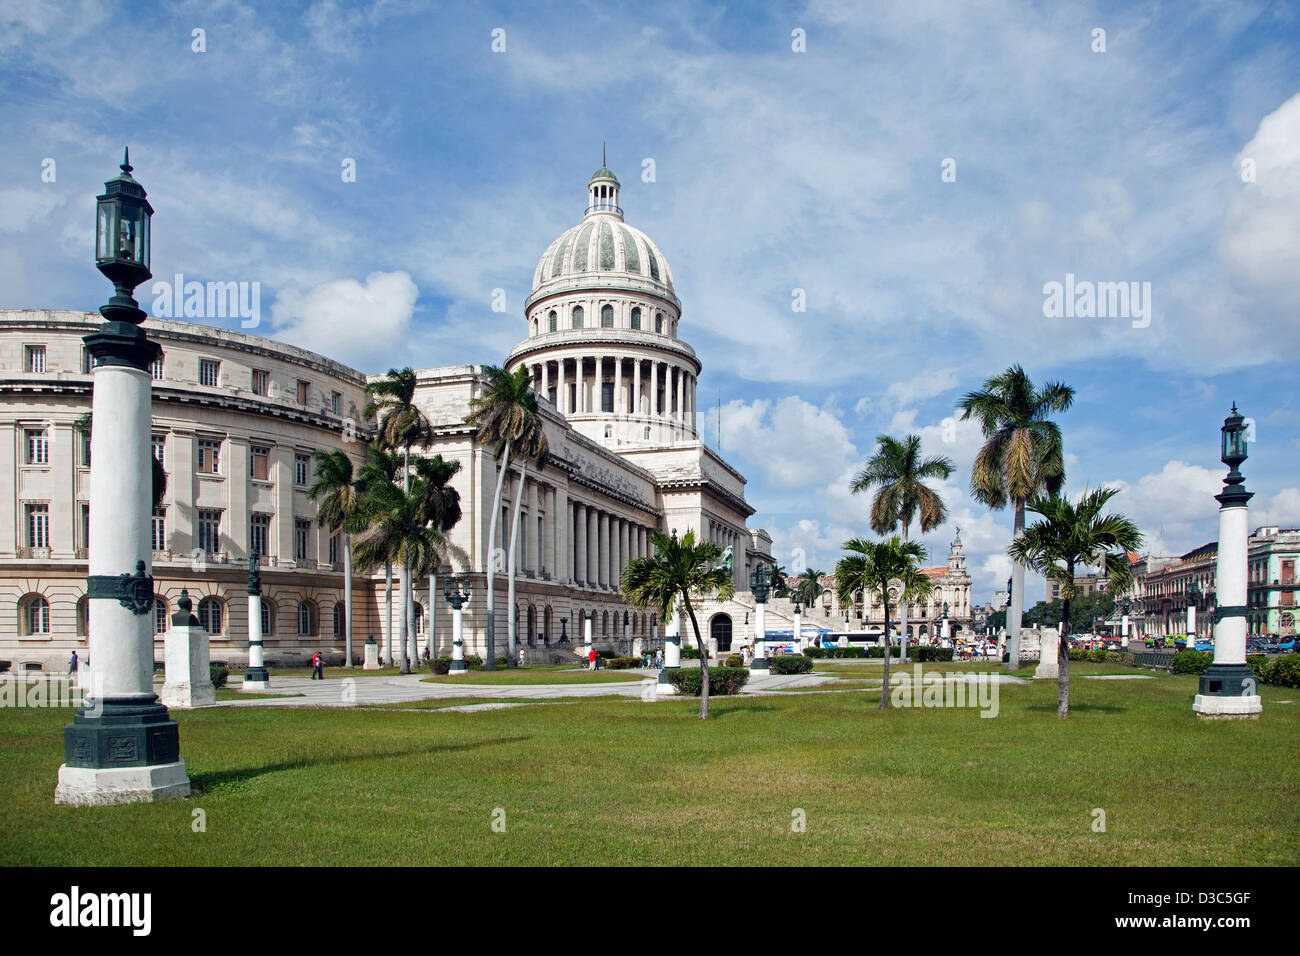 The El Capitolio / National Capitol Building in Neo-classical style in the capital city Havana, Cuba, Caribbean Stock Photo